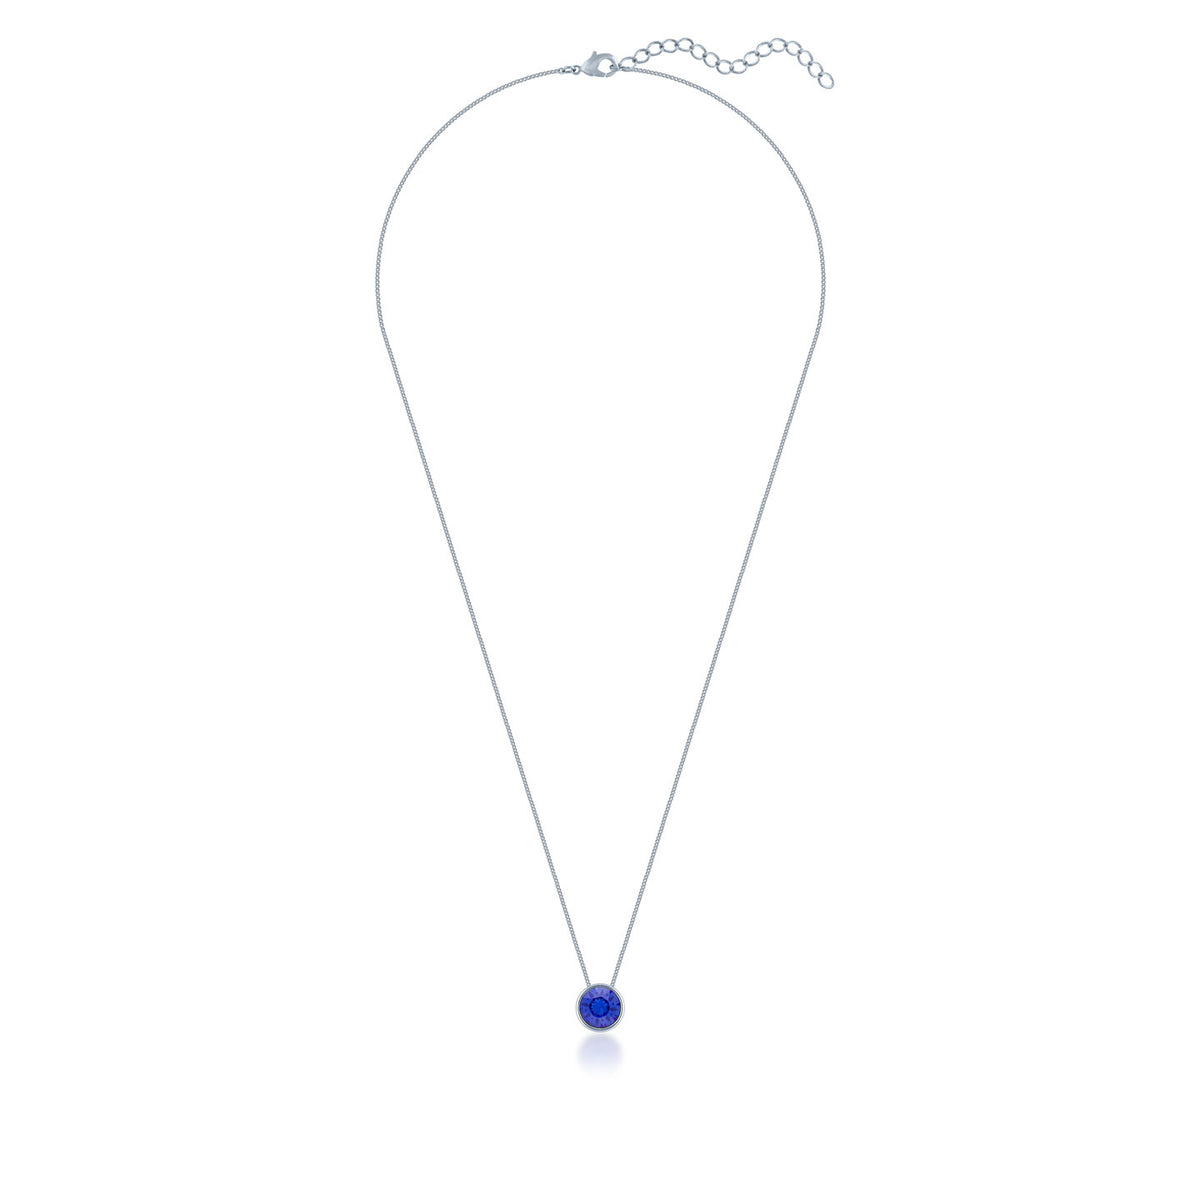 Harley Small Pendant Necklace with Blue Sapphire Round Crystals from Swarovski Silver Toned Rhodium Plated - Ed Heart